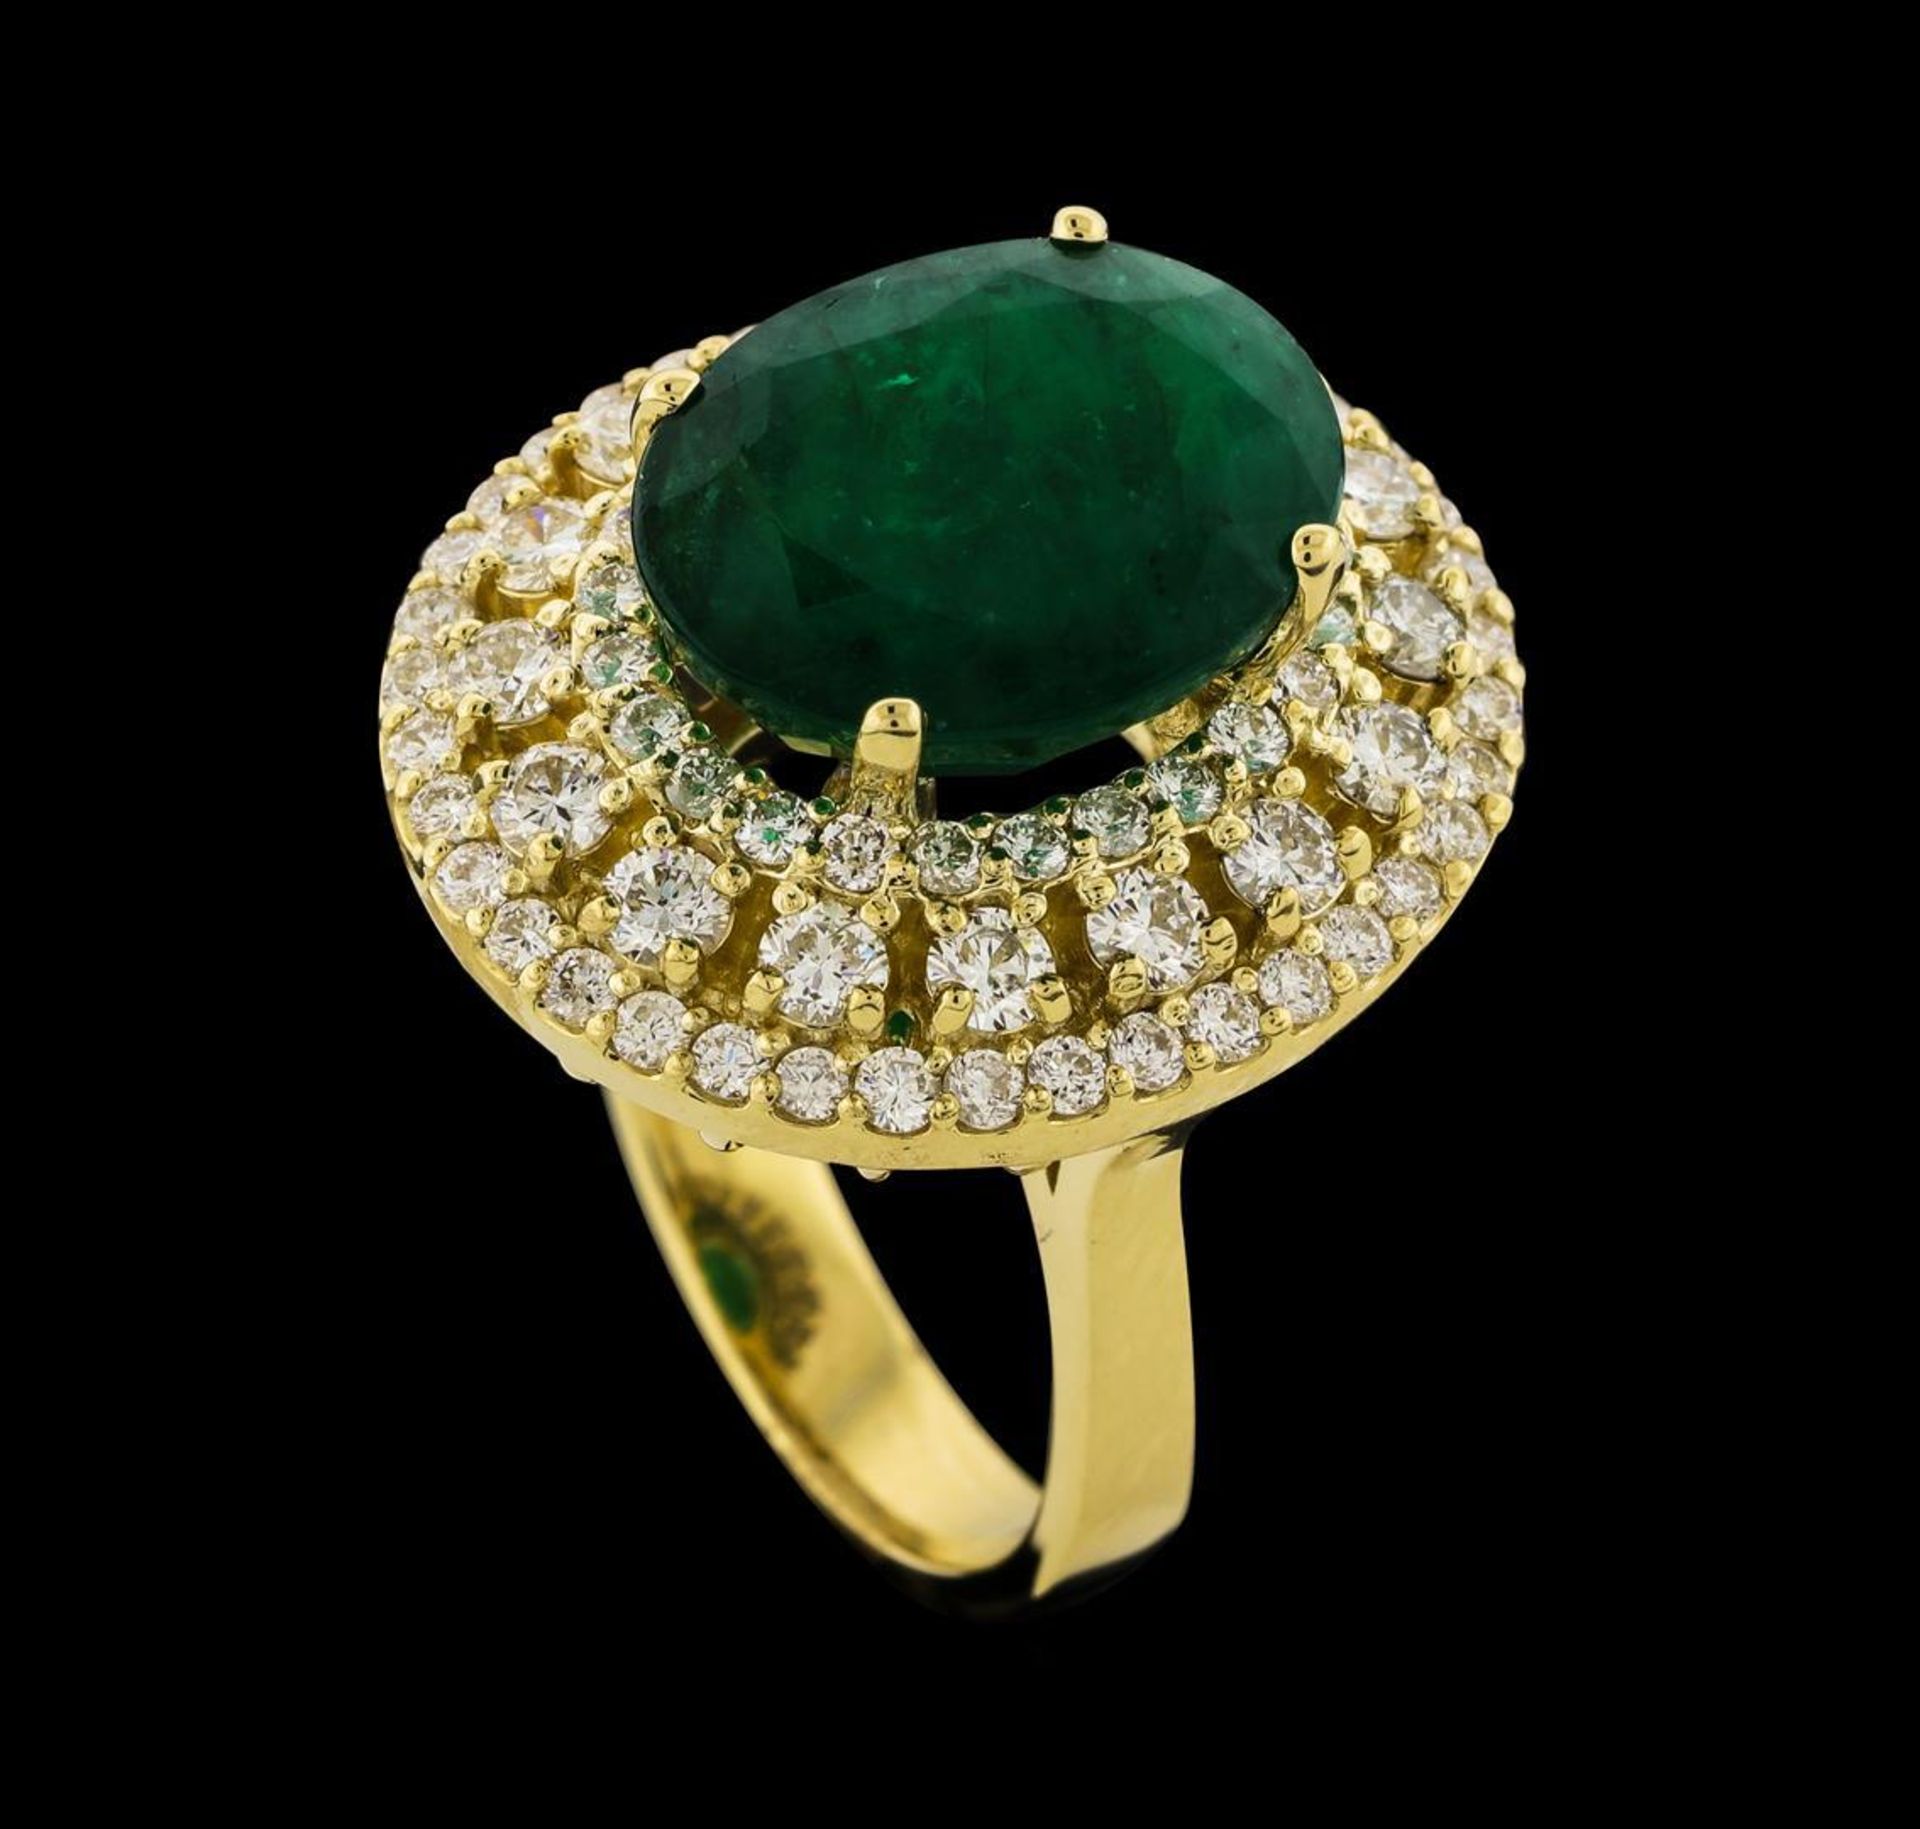 6.63 ctw Emerald and Diamond Ring - 14KT Yellow Gold - Image 4 of 5